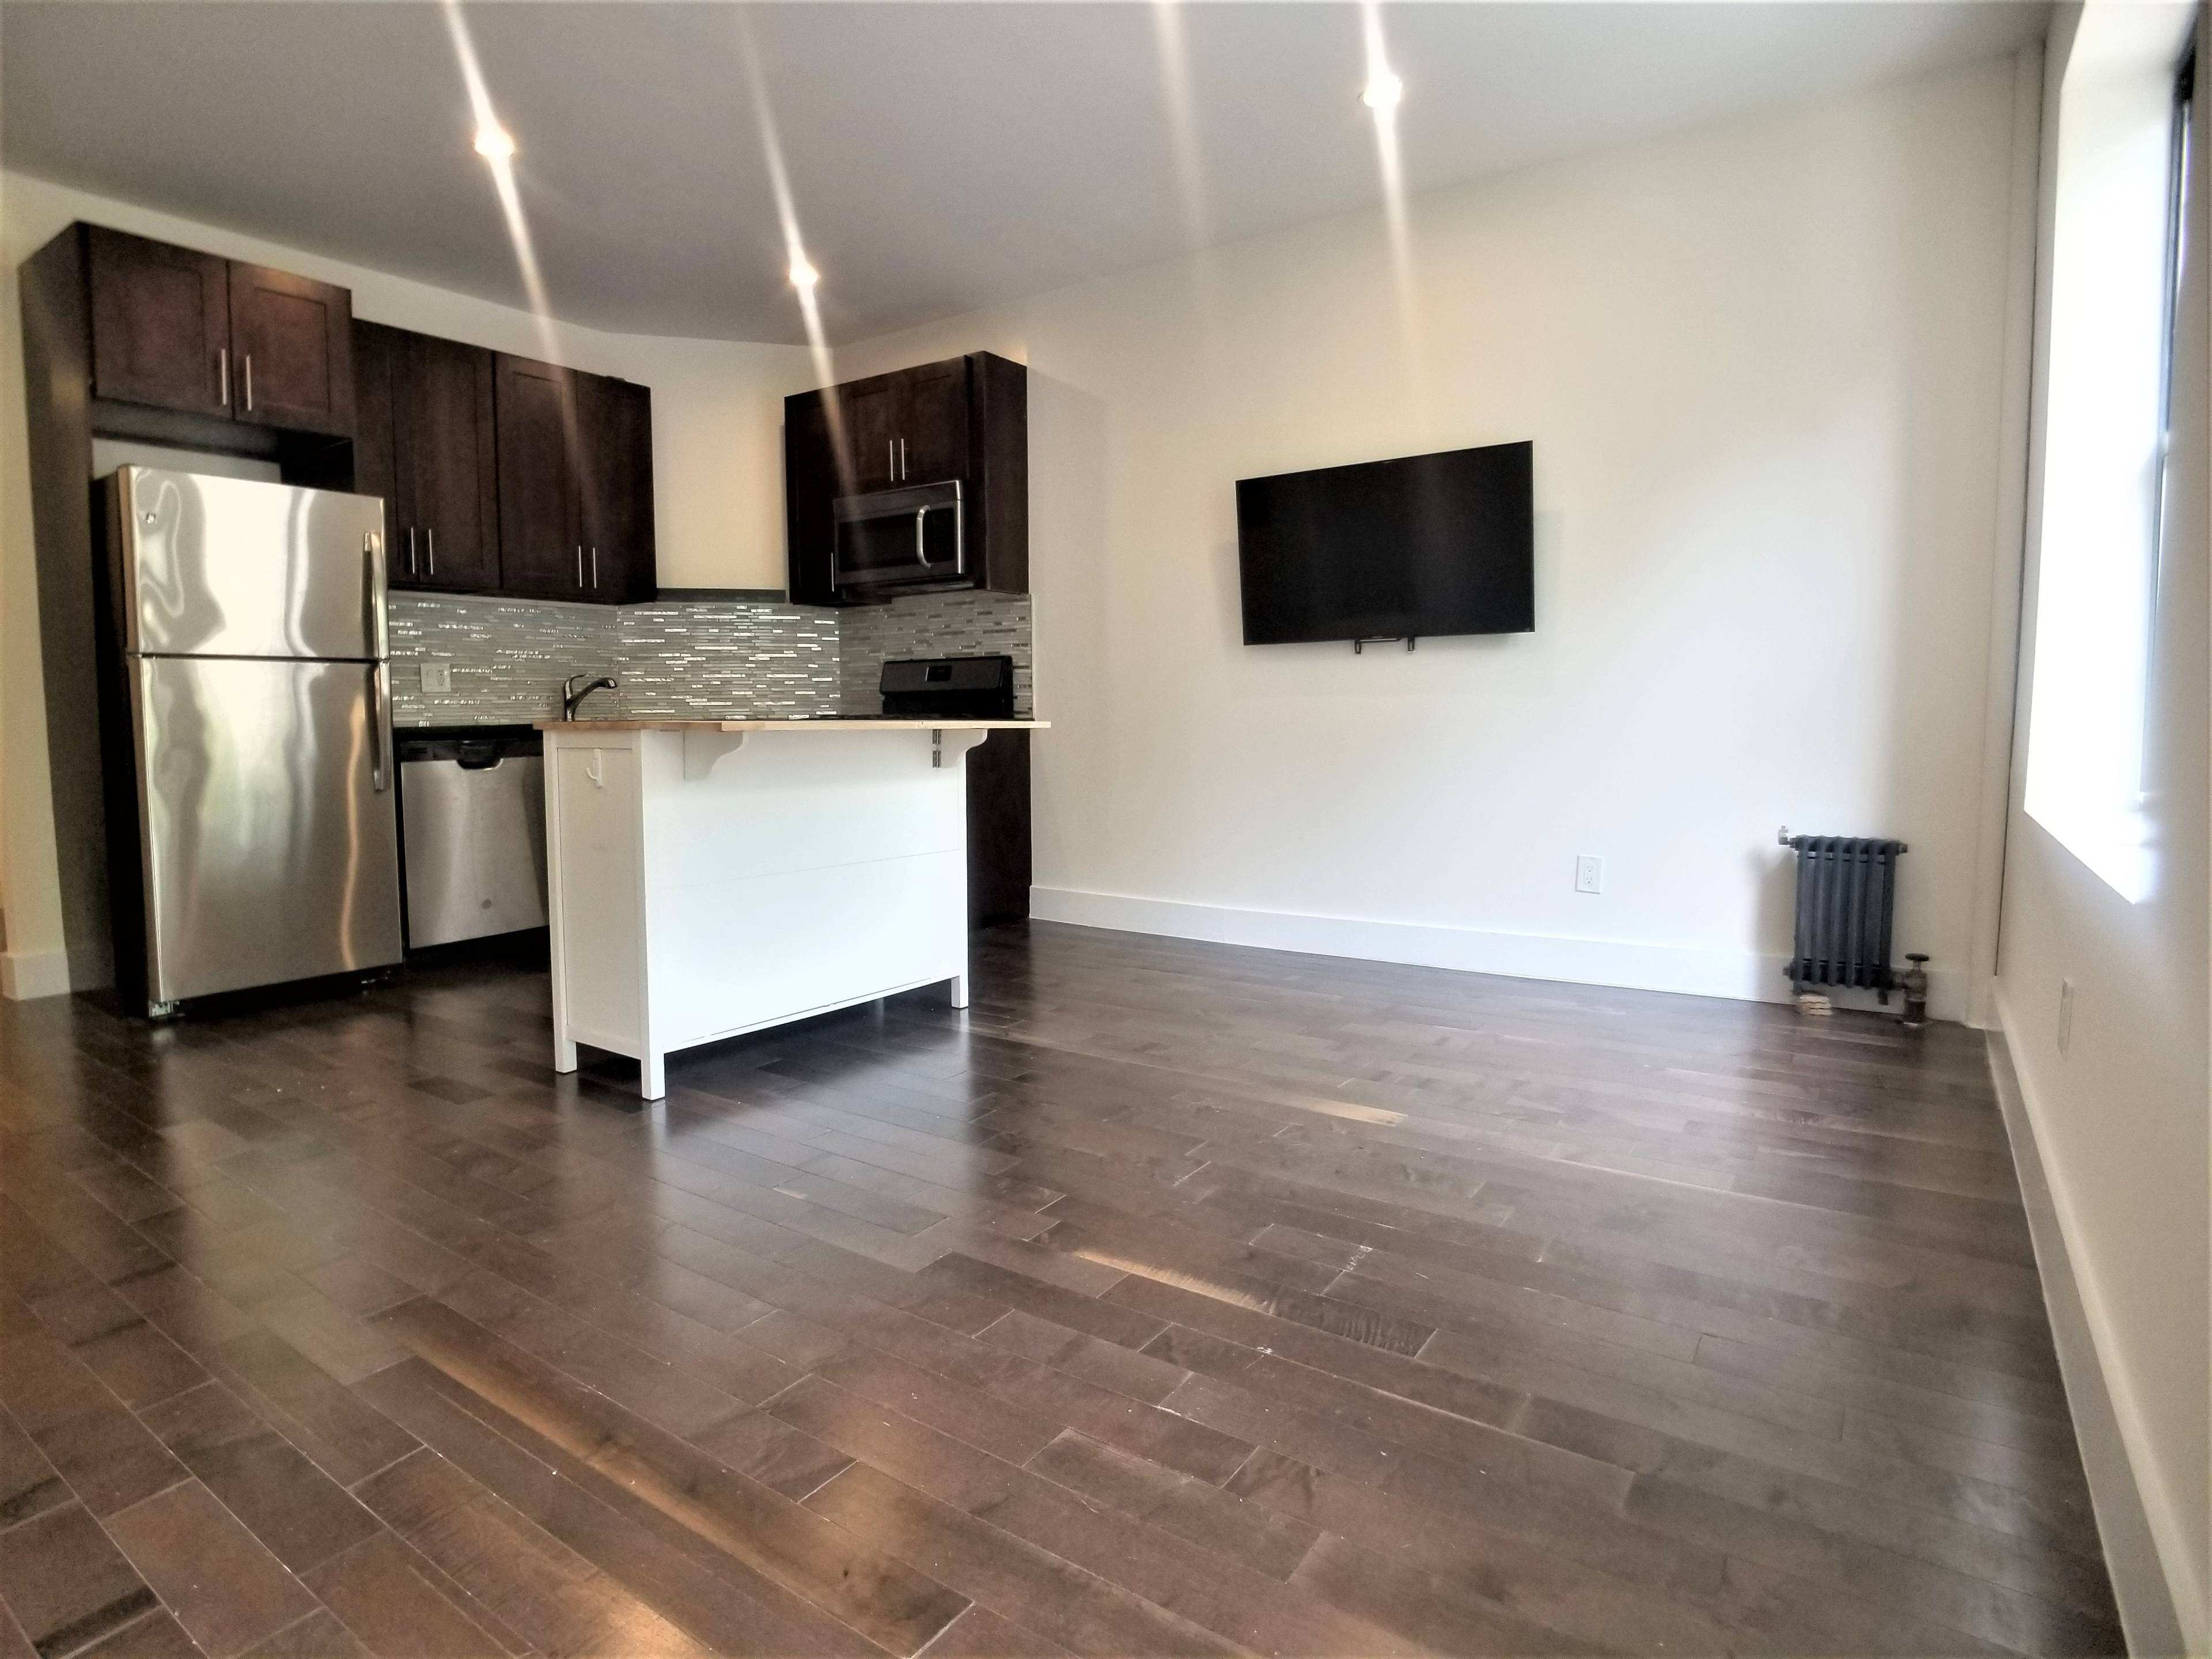 Spectacular, Gut Renovated 4 bedroom, 2 bath just a few short blocks to Columbia Medical NY Presbyterian HospitalEasy access to all major transportationRenovations to be completed for a mid August ...